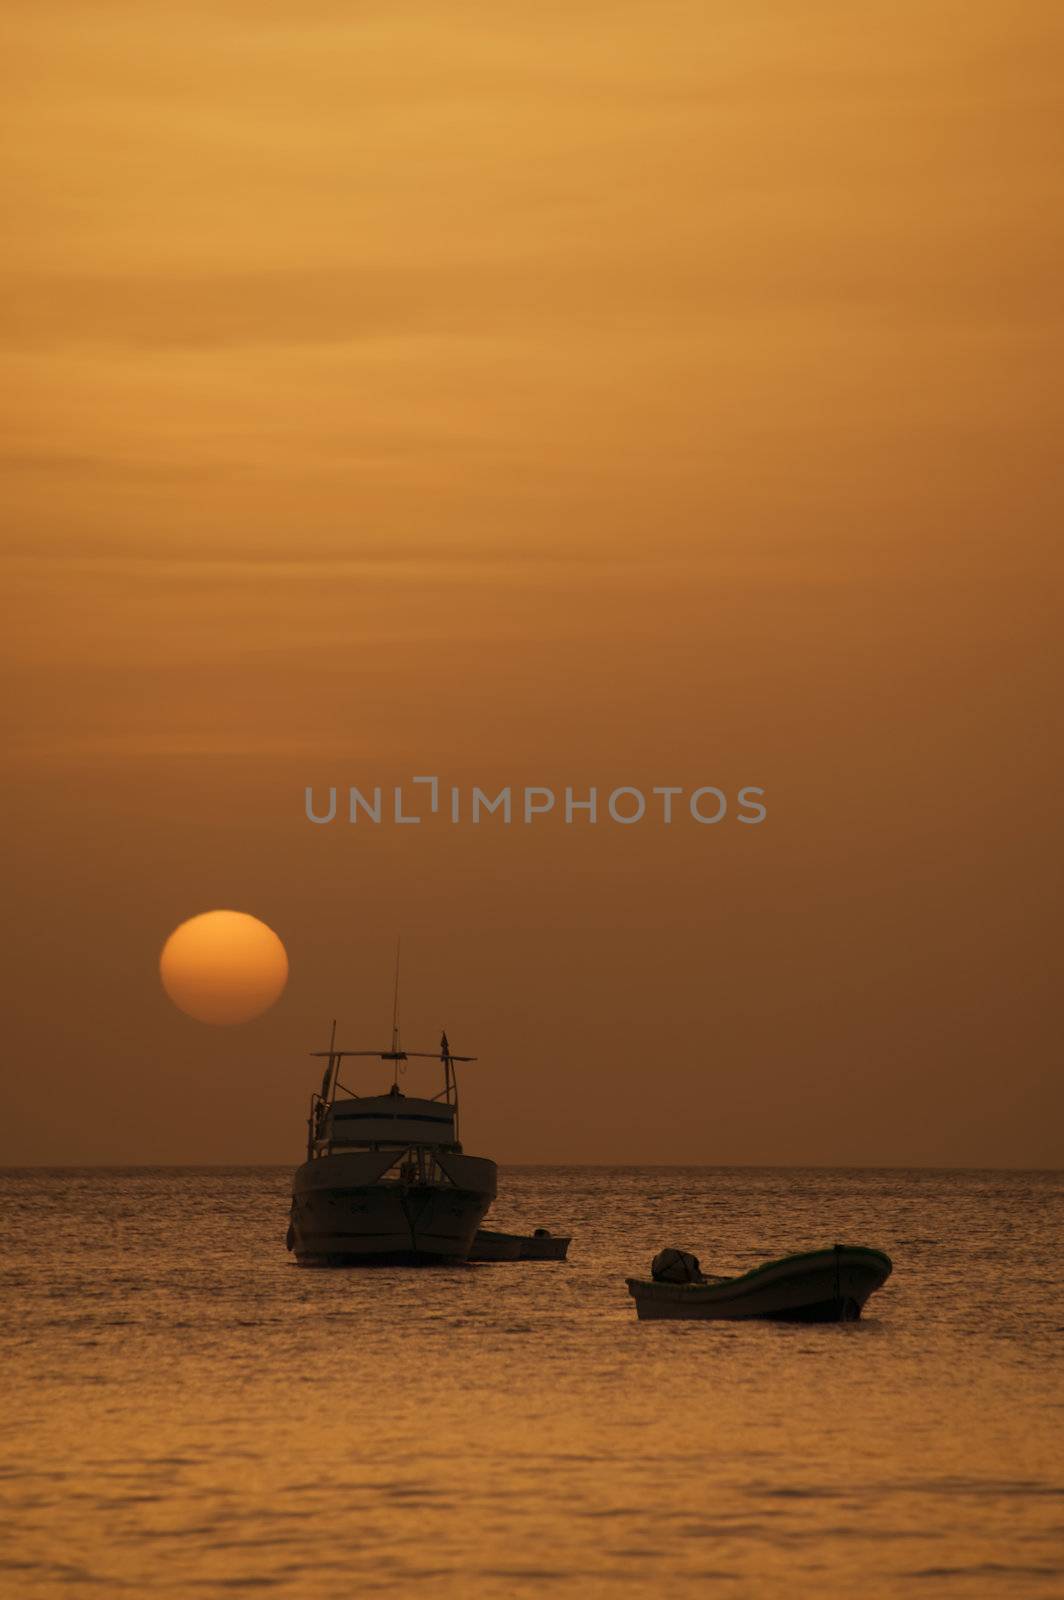 Two boats in front of a setting sun at dusk